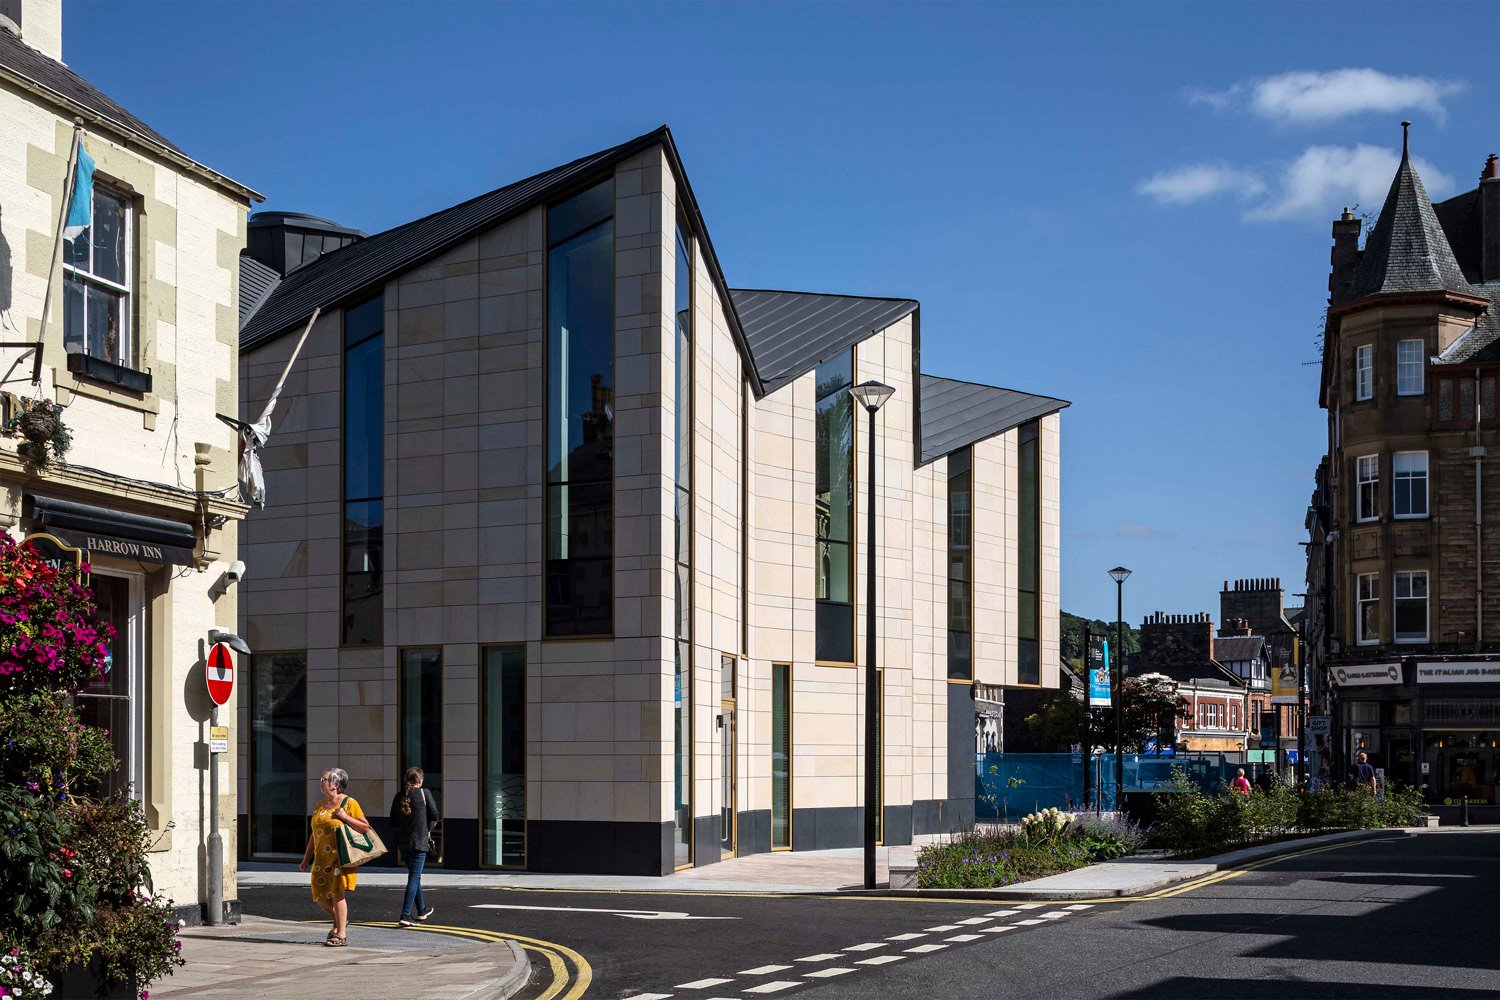 Glasgow-Institute-of-Architects-awards-2021-leisure-arts-2-View-from-High-St.jpg